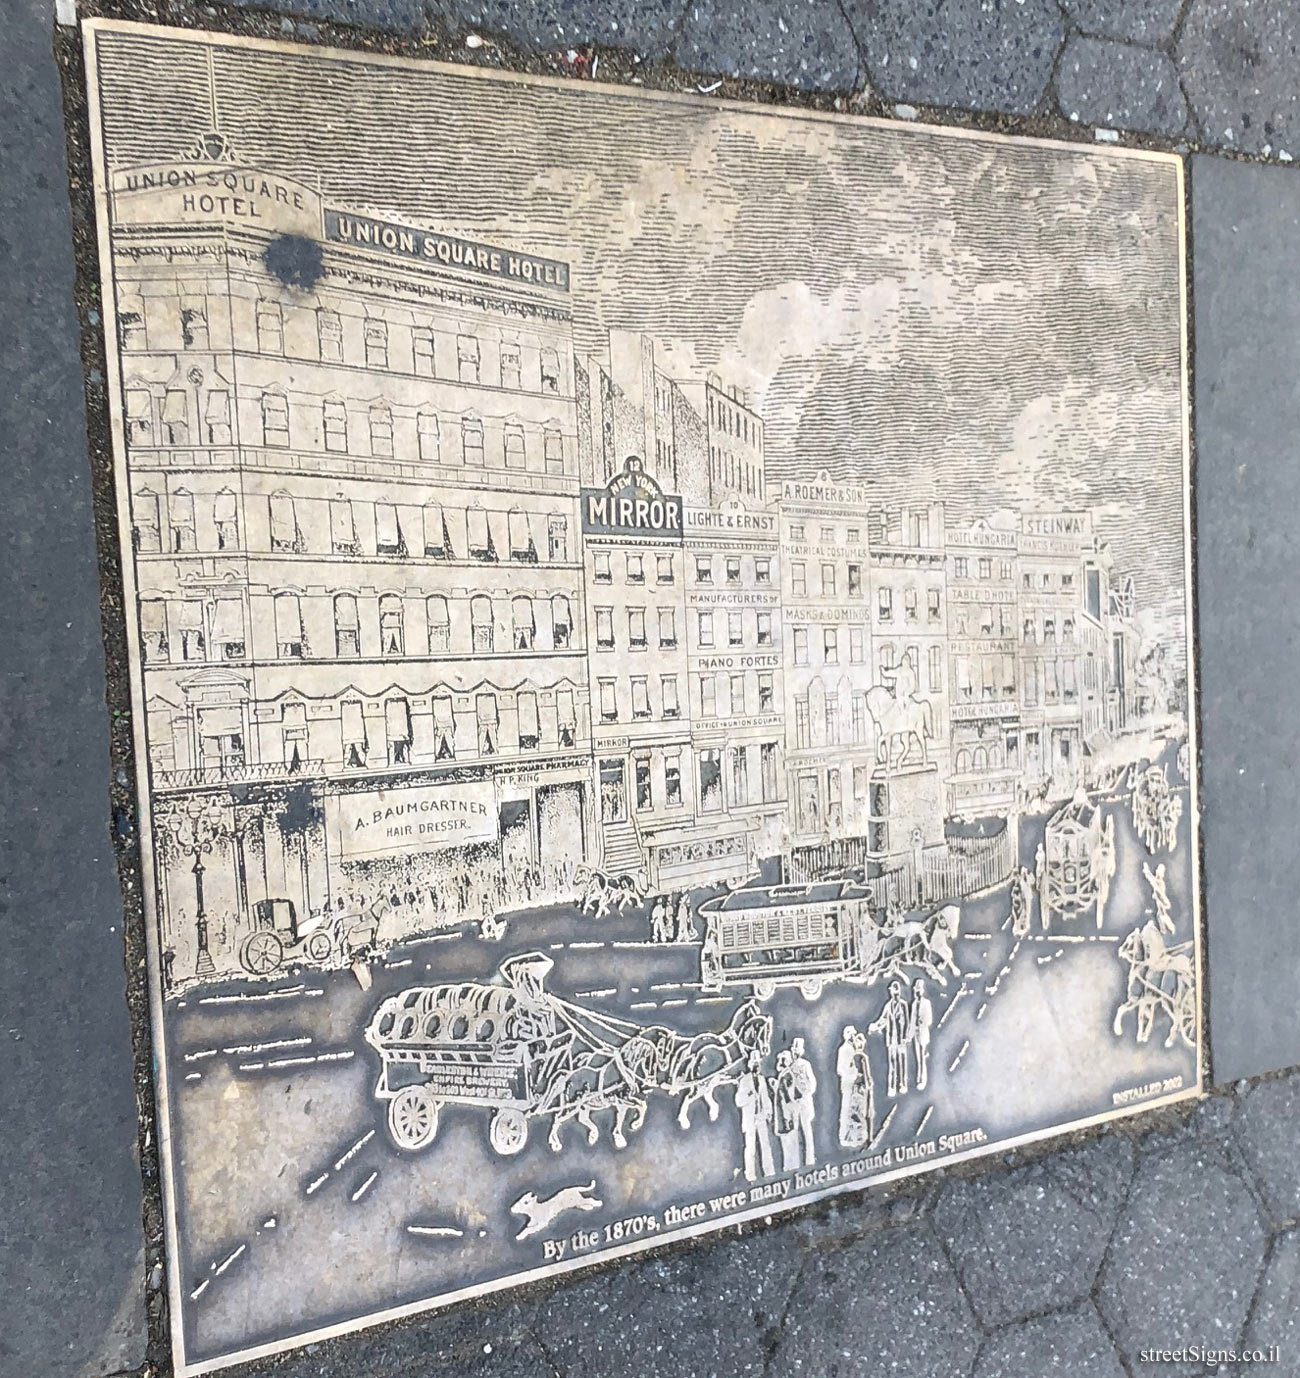 New York - Union Square Route - Hotels around Union Square in the 1870s